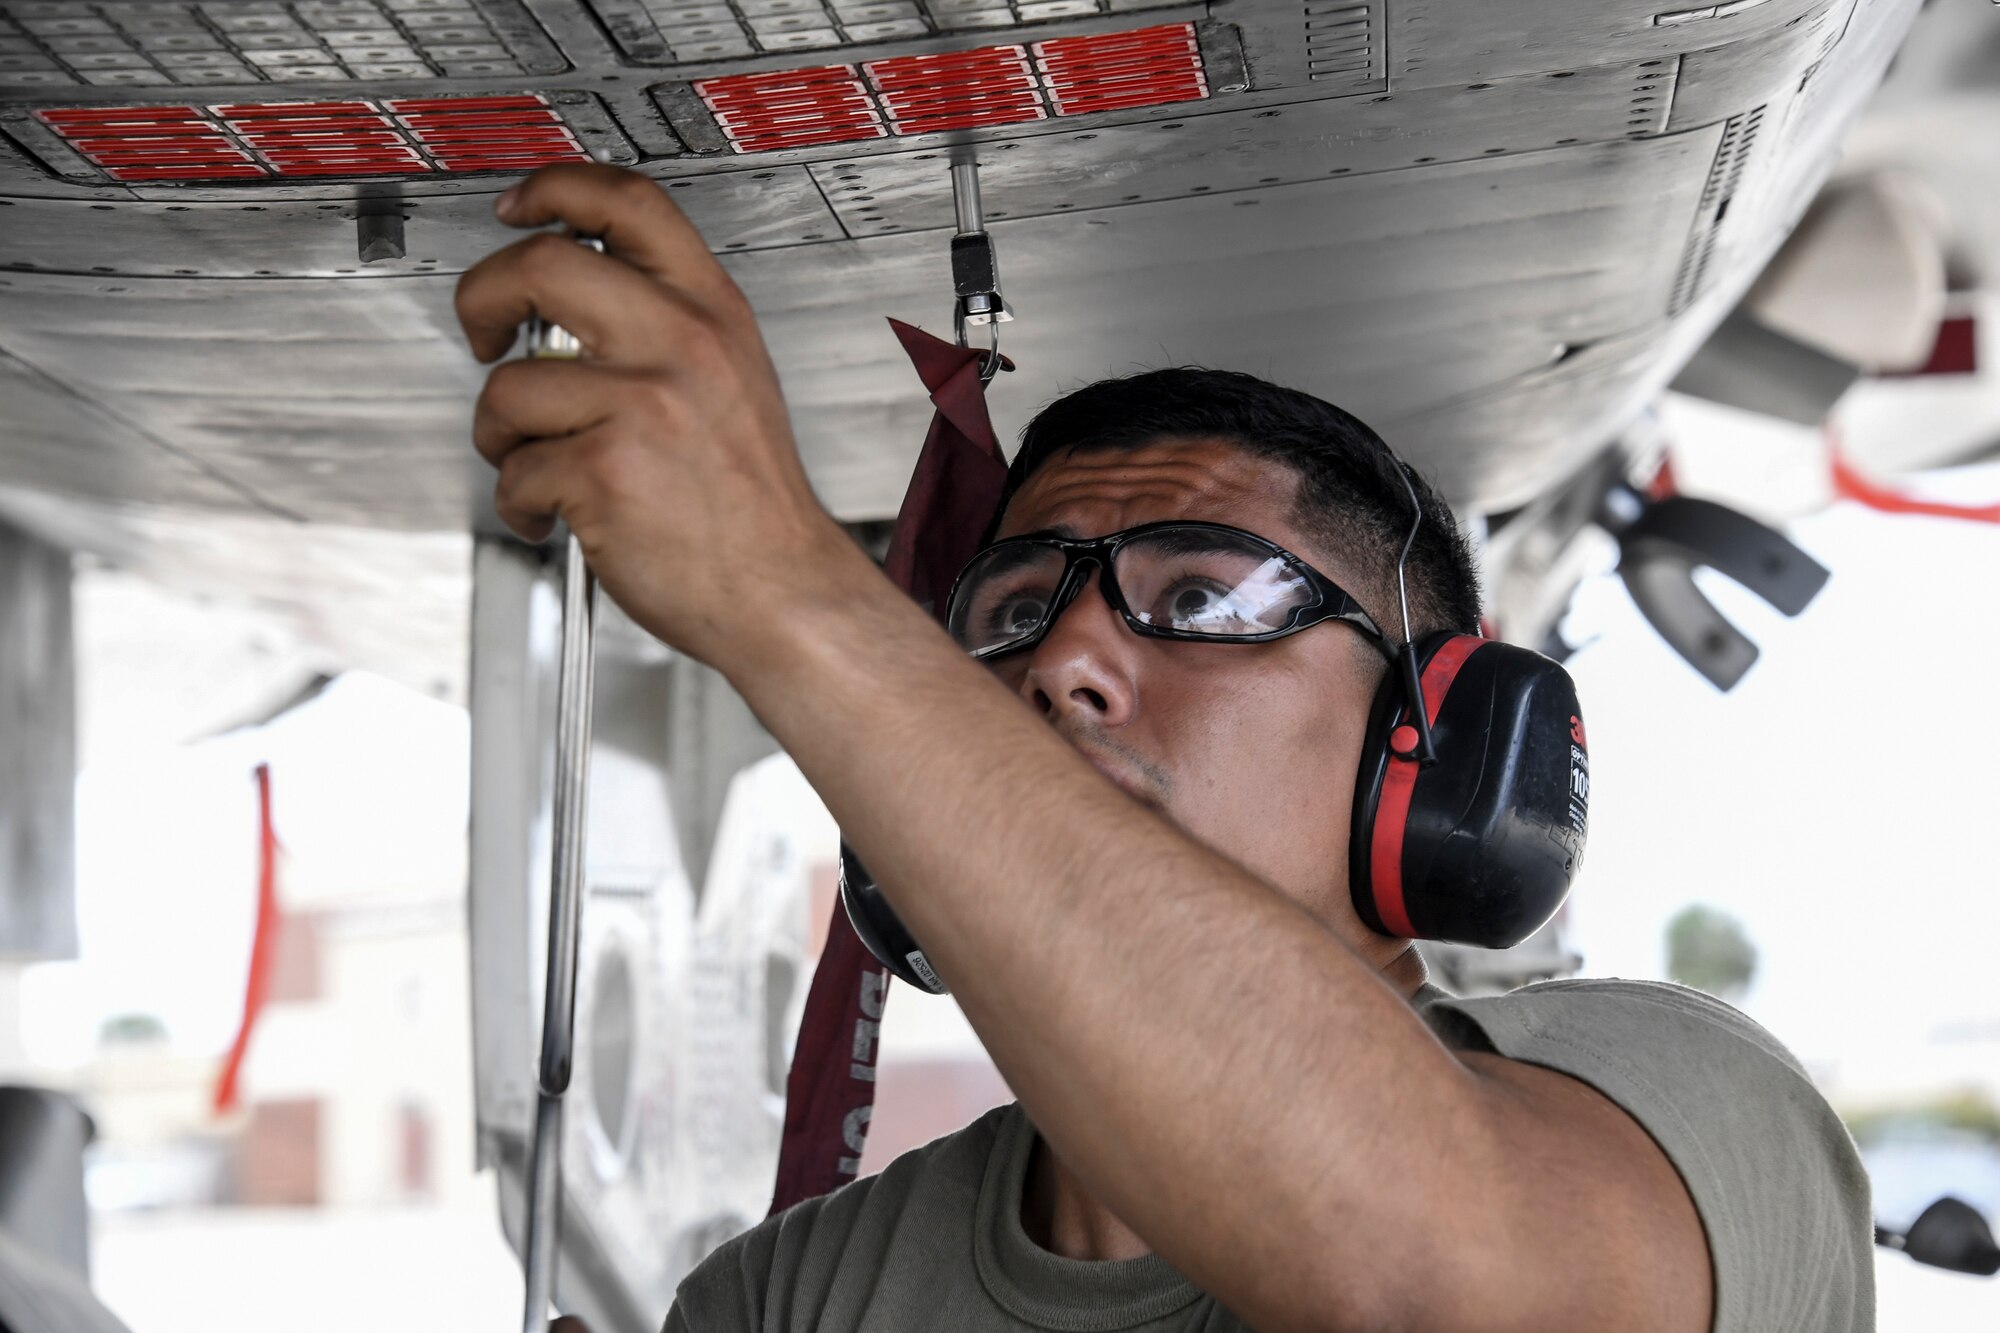 Airman 1st Class Jesus Molina-Serrato, 144th Maintenance Squadron, checks the countermeasures of a U.S. Air Force F-15C Eagle fighter jet after it returned from a sortie during Checkered Flag, Tyndall Air Force Base, Florida, Nov. 9, 2020.